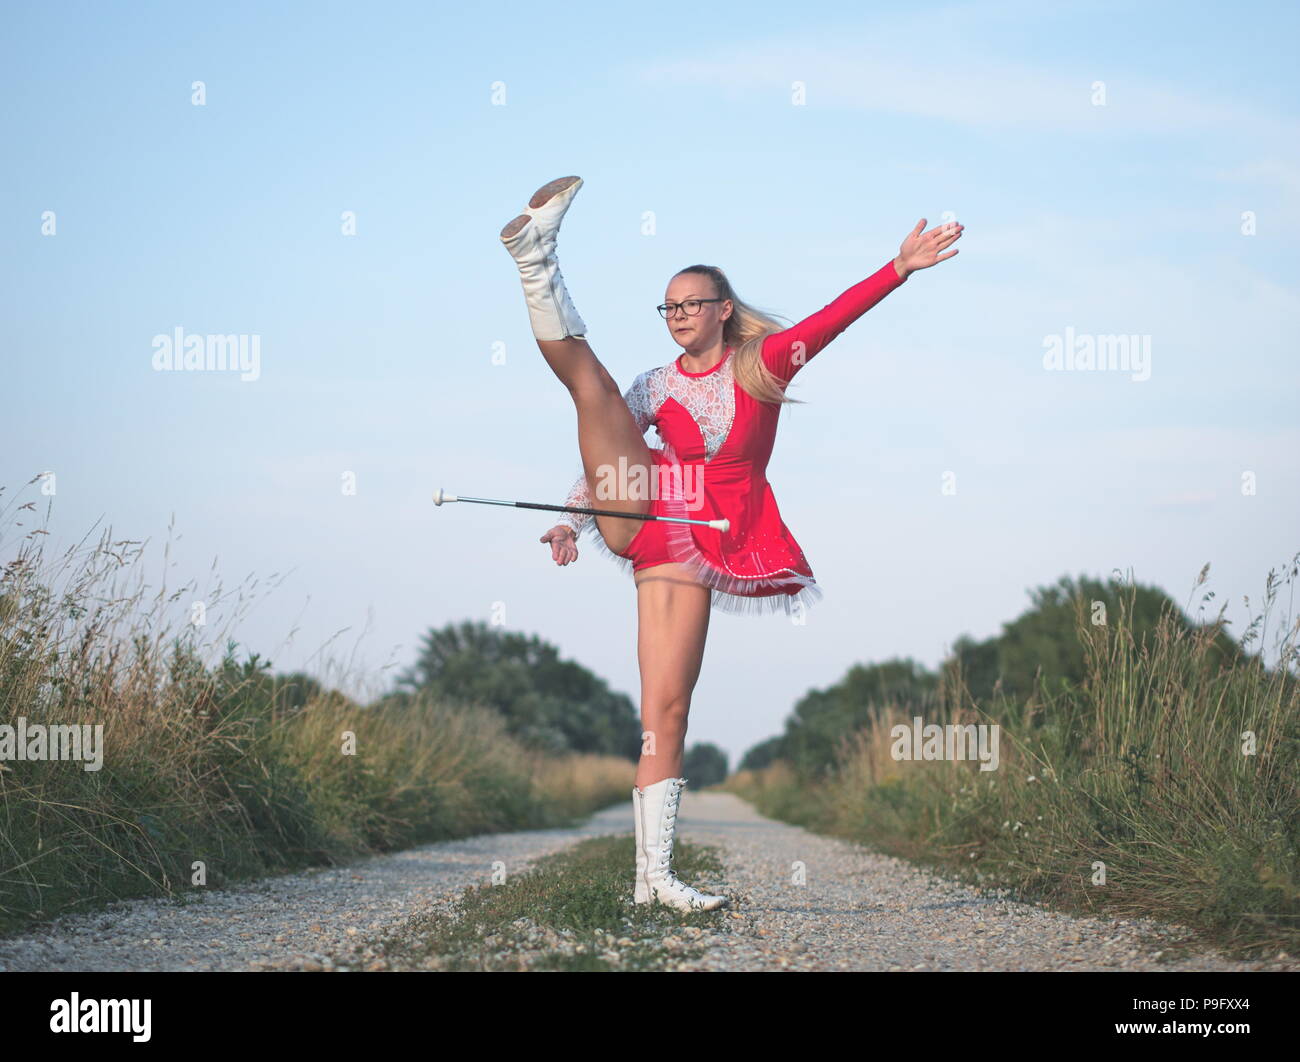 Bespectacled Blonde Teen Majorette Girl Twirling Baton Outdoors in Red Dress Stock Photo